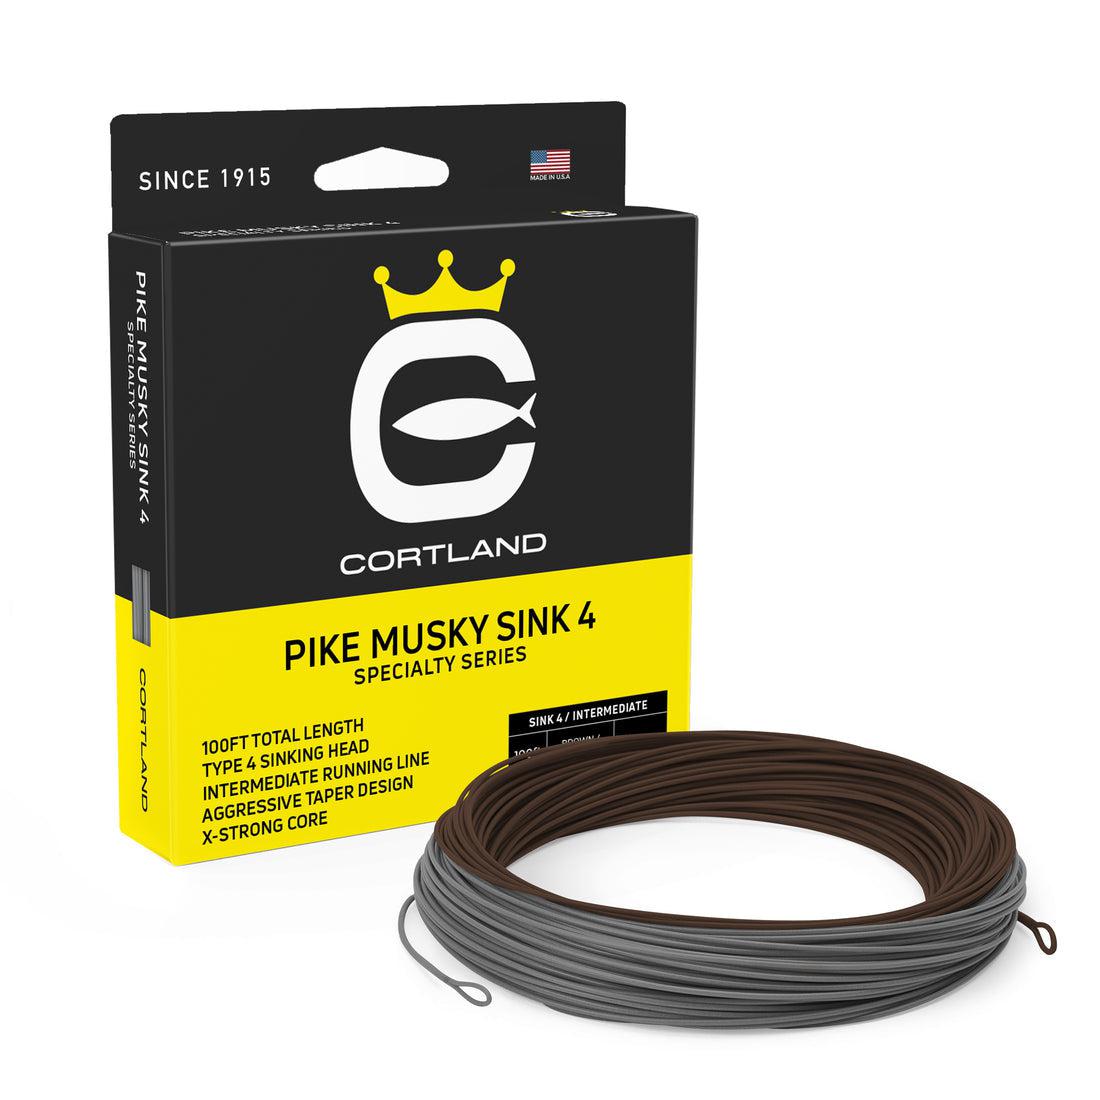 https://cdn.shopify.com/s/files/1/0601/3206/5515/products/cortland-pike-musky-sink-4-fly-line-fly_lines_1100x.jpg?v=1681862094